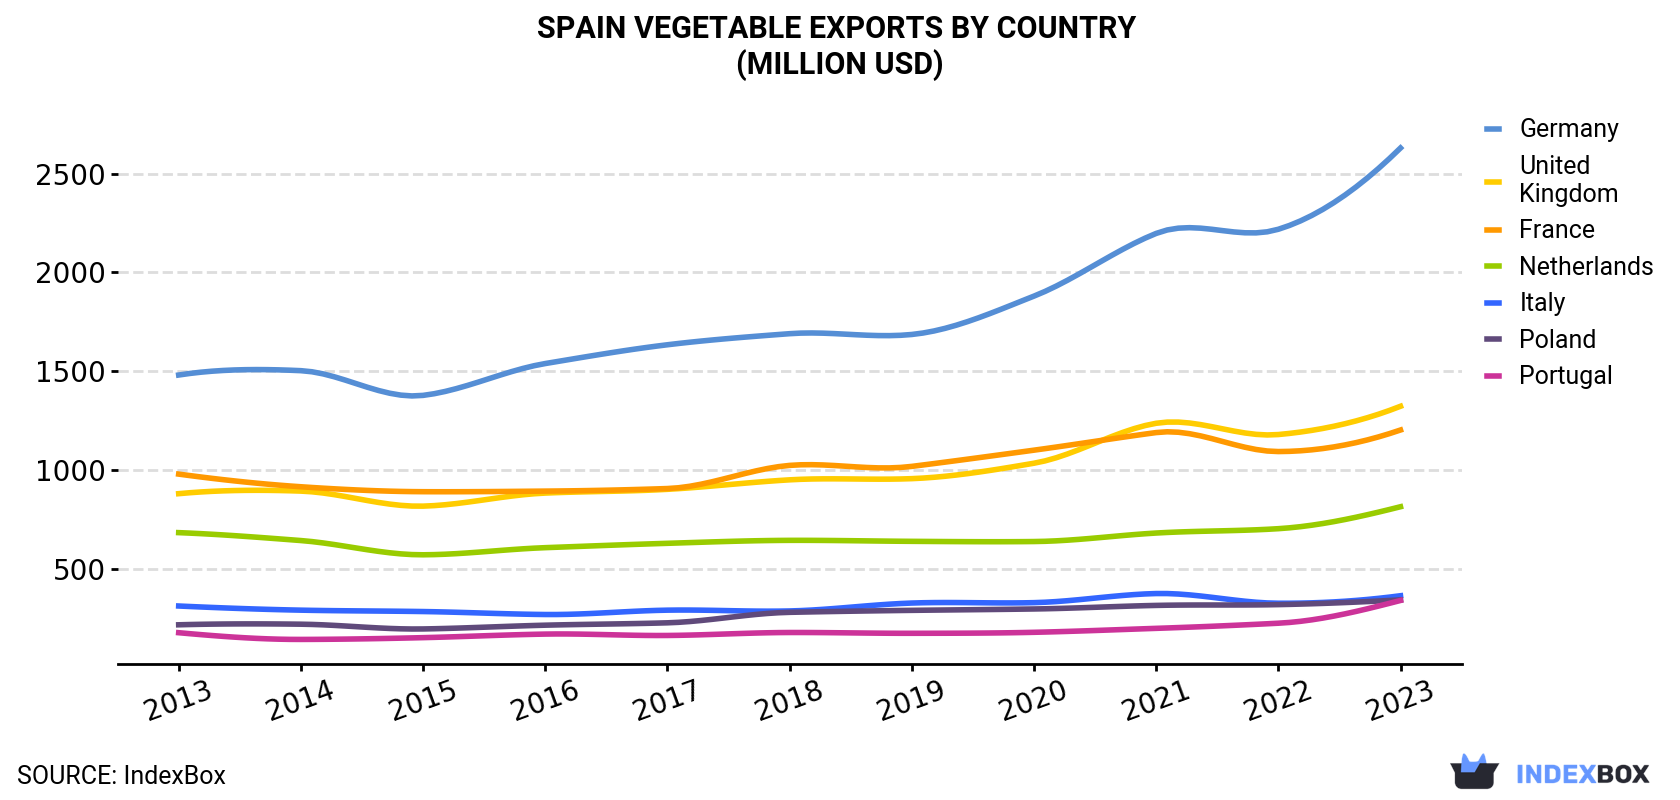 Spain Vegetable Exports By Country (Million USD)